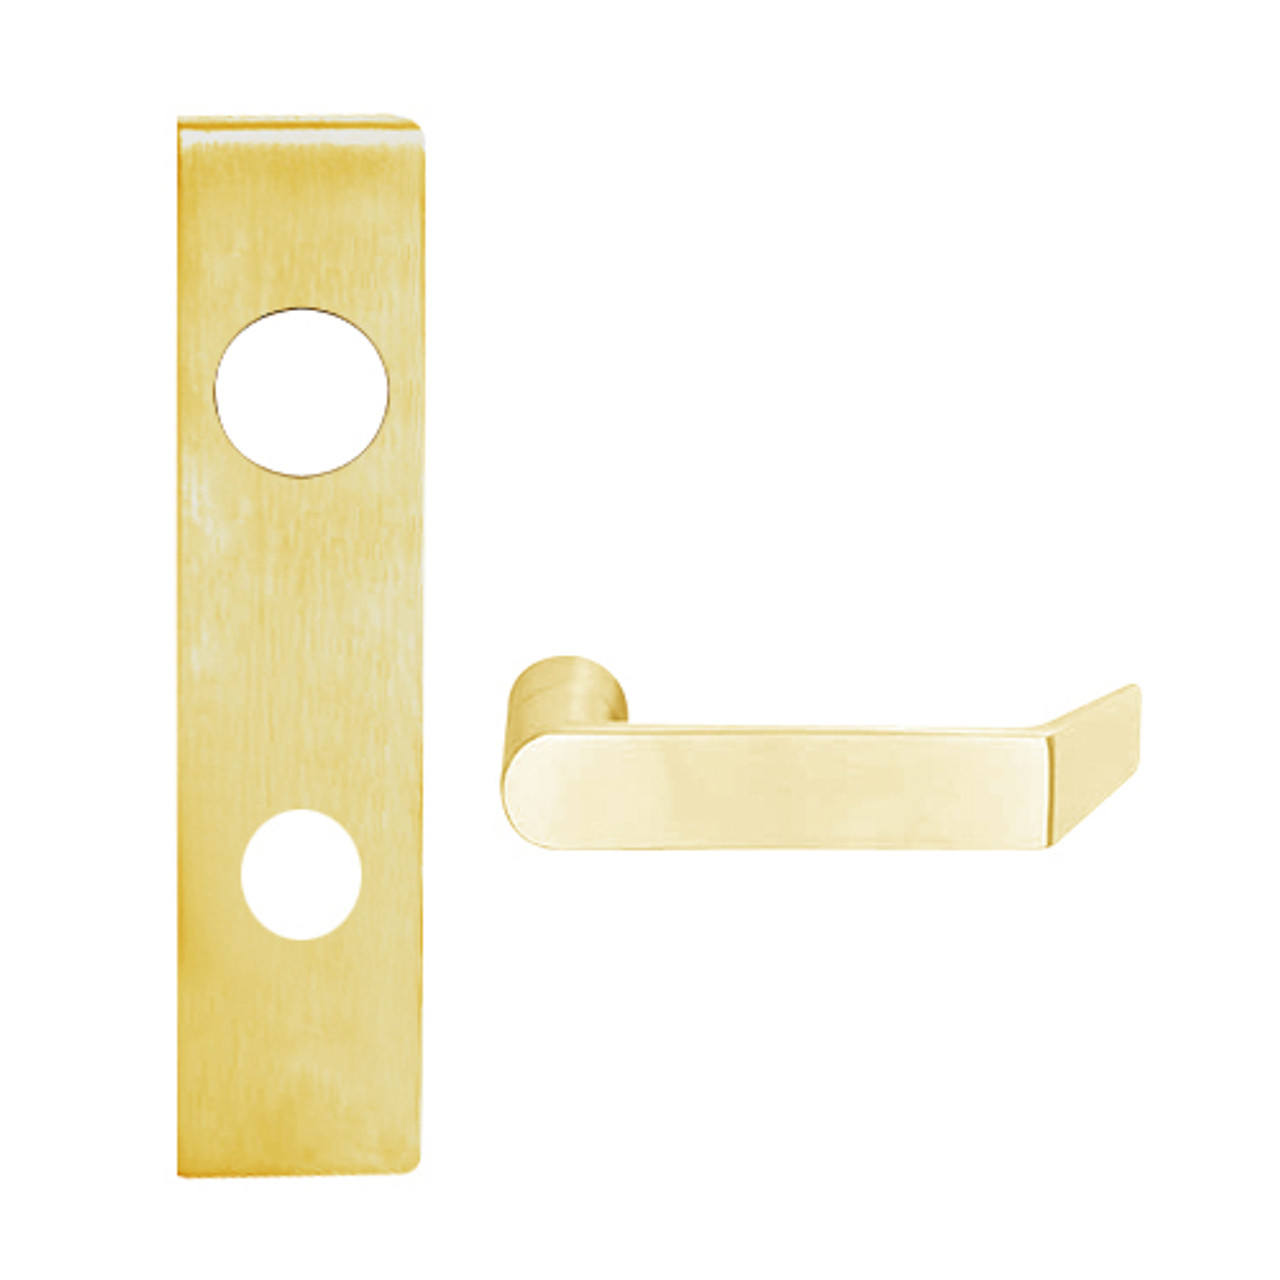 L9050J-06L-605 Schlage L Series Entrance Commercial Mortise Lock with 06 Cast Lever Design Prepped for FSIC in Bright Brass